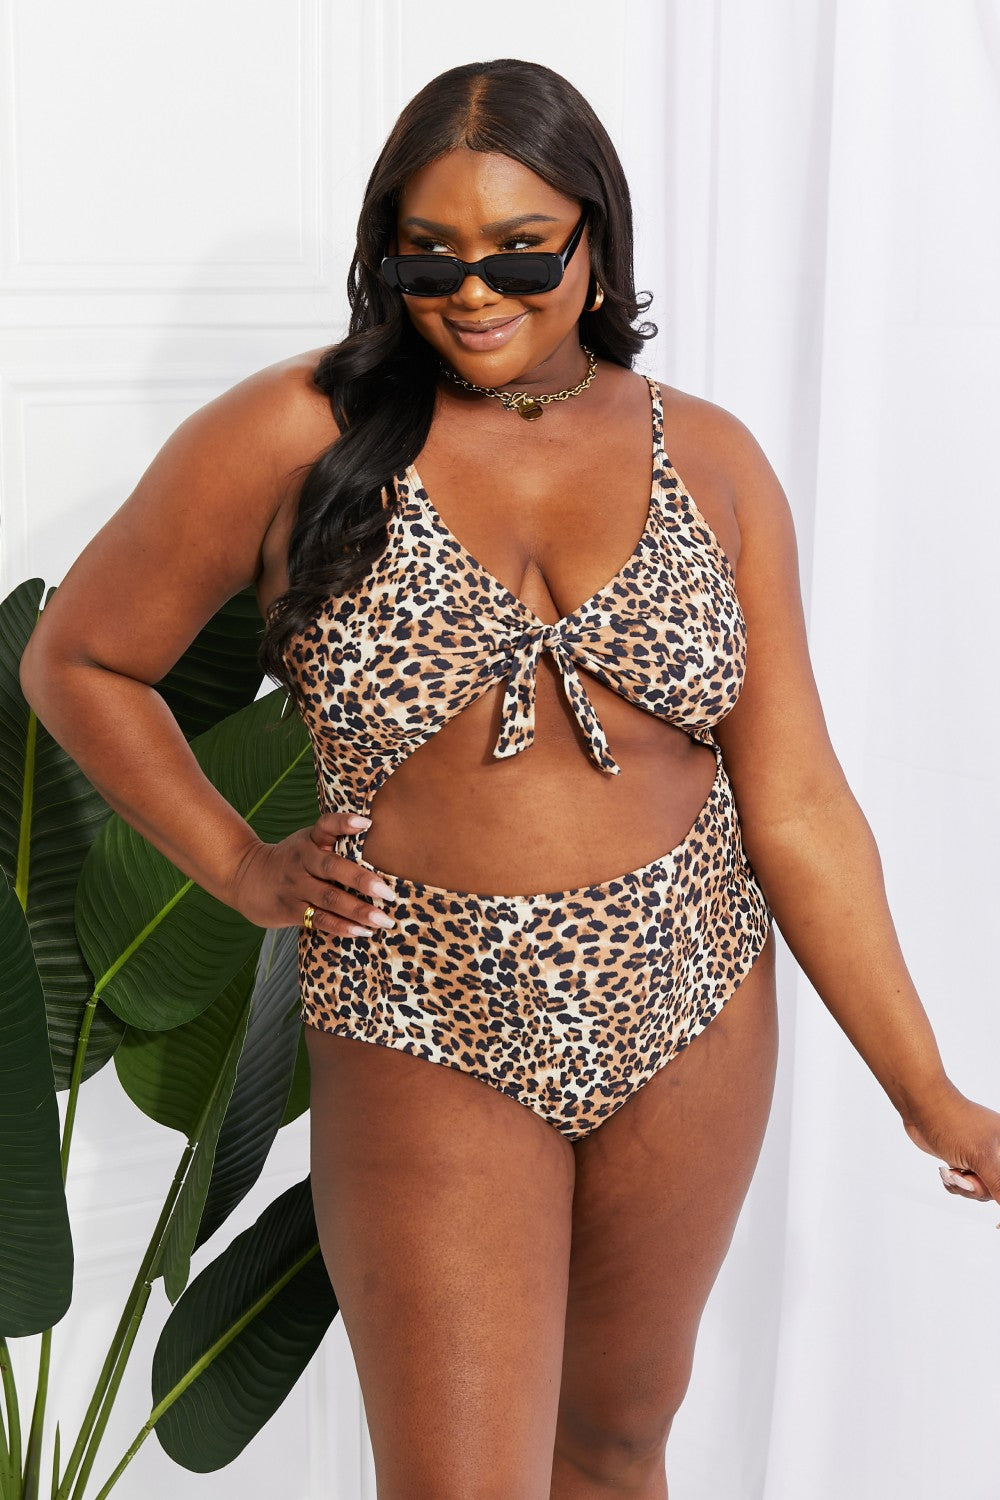 The Queen Of The Sea Plus Size Swimsuit